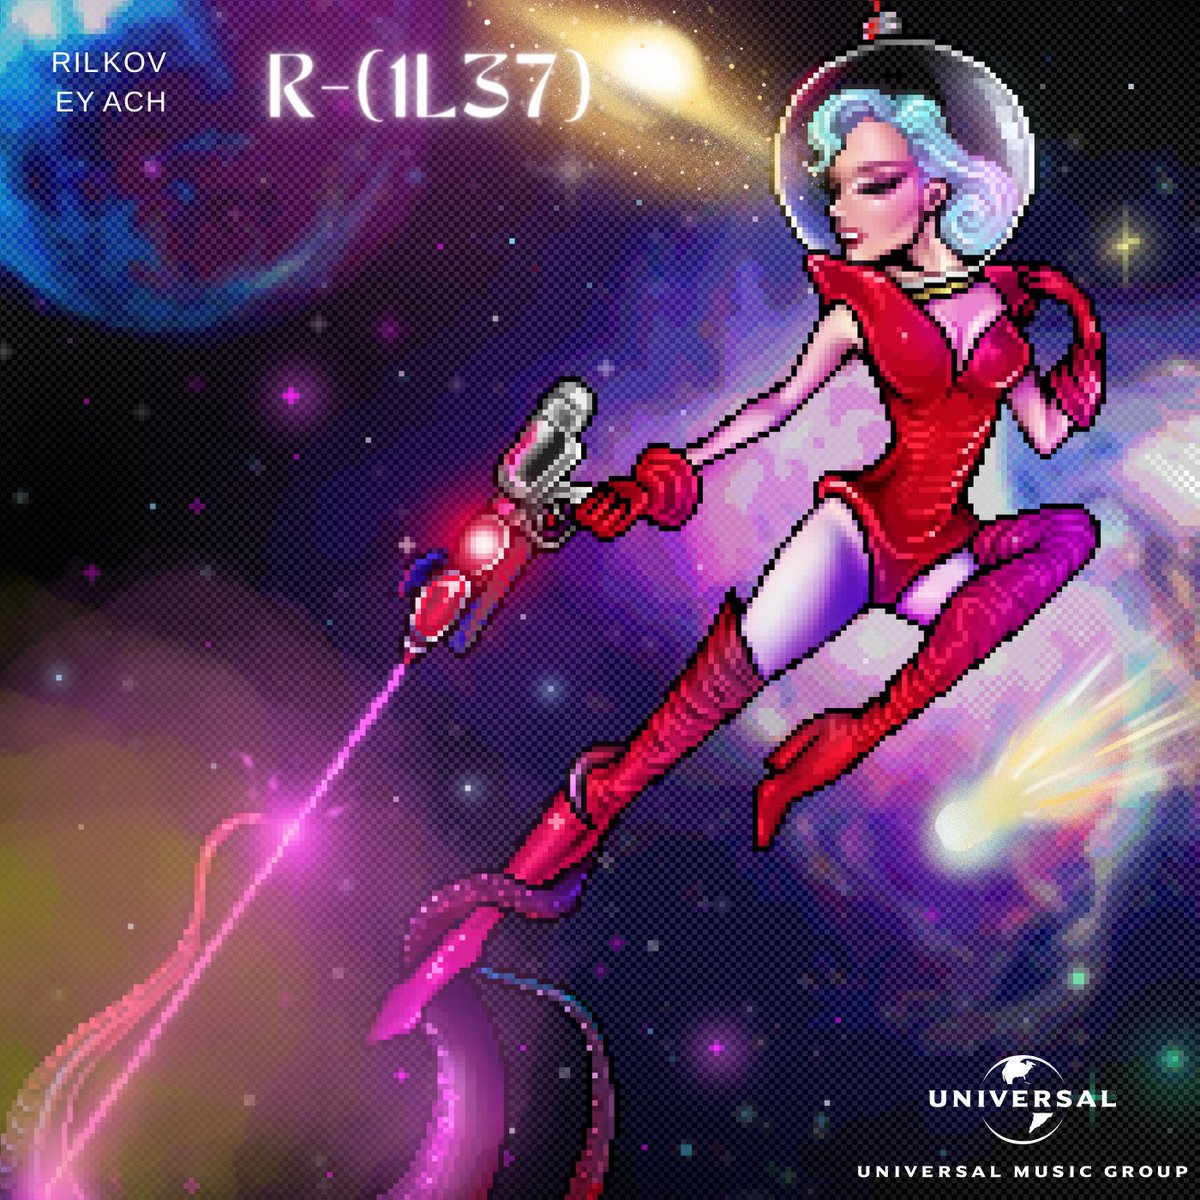 PLANET R-(1L37)🛸🚀🌟 Very happy to share my second studio album with all of you, I hope you enjoy it as much as I did throughout the journey it took to create this work of art! Now available on all music platforms. Special thanks to: @07zipvero